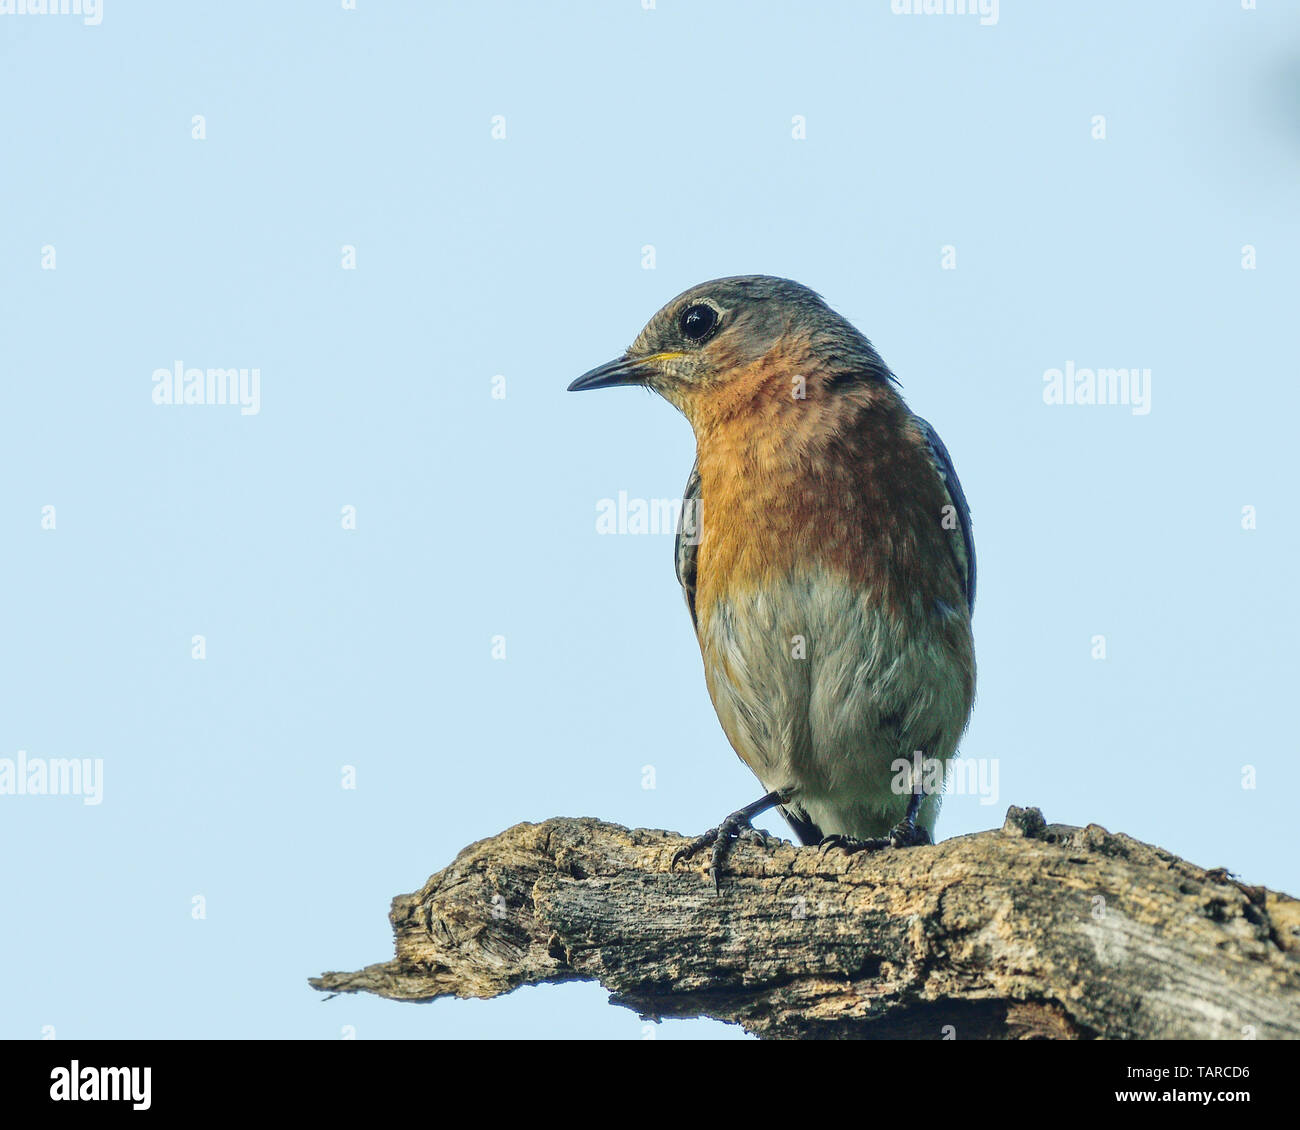 Eastern Bluebird - North American wild songbird perched on tree branch against blue sky Stock Photo